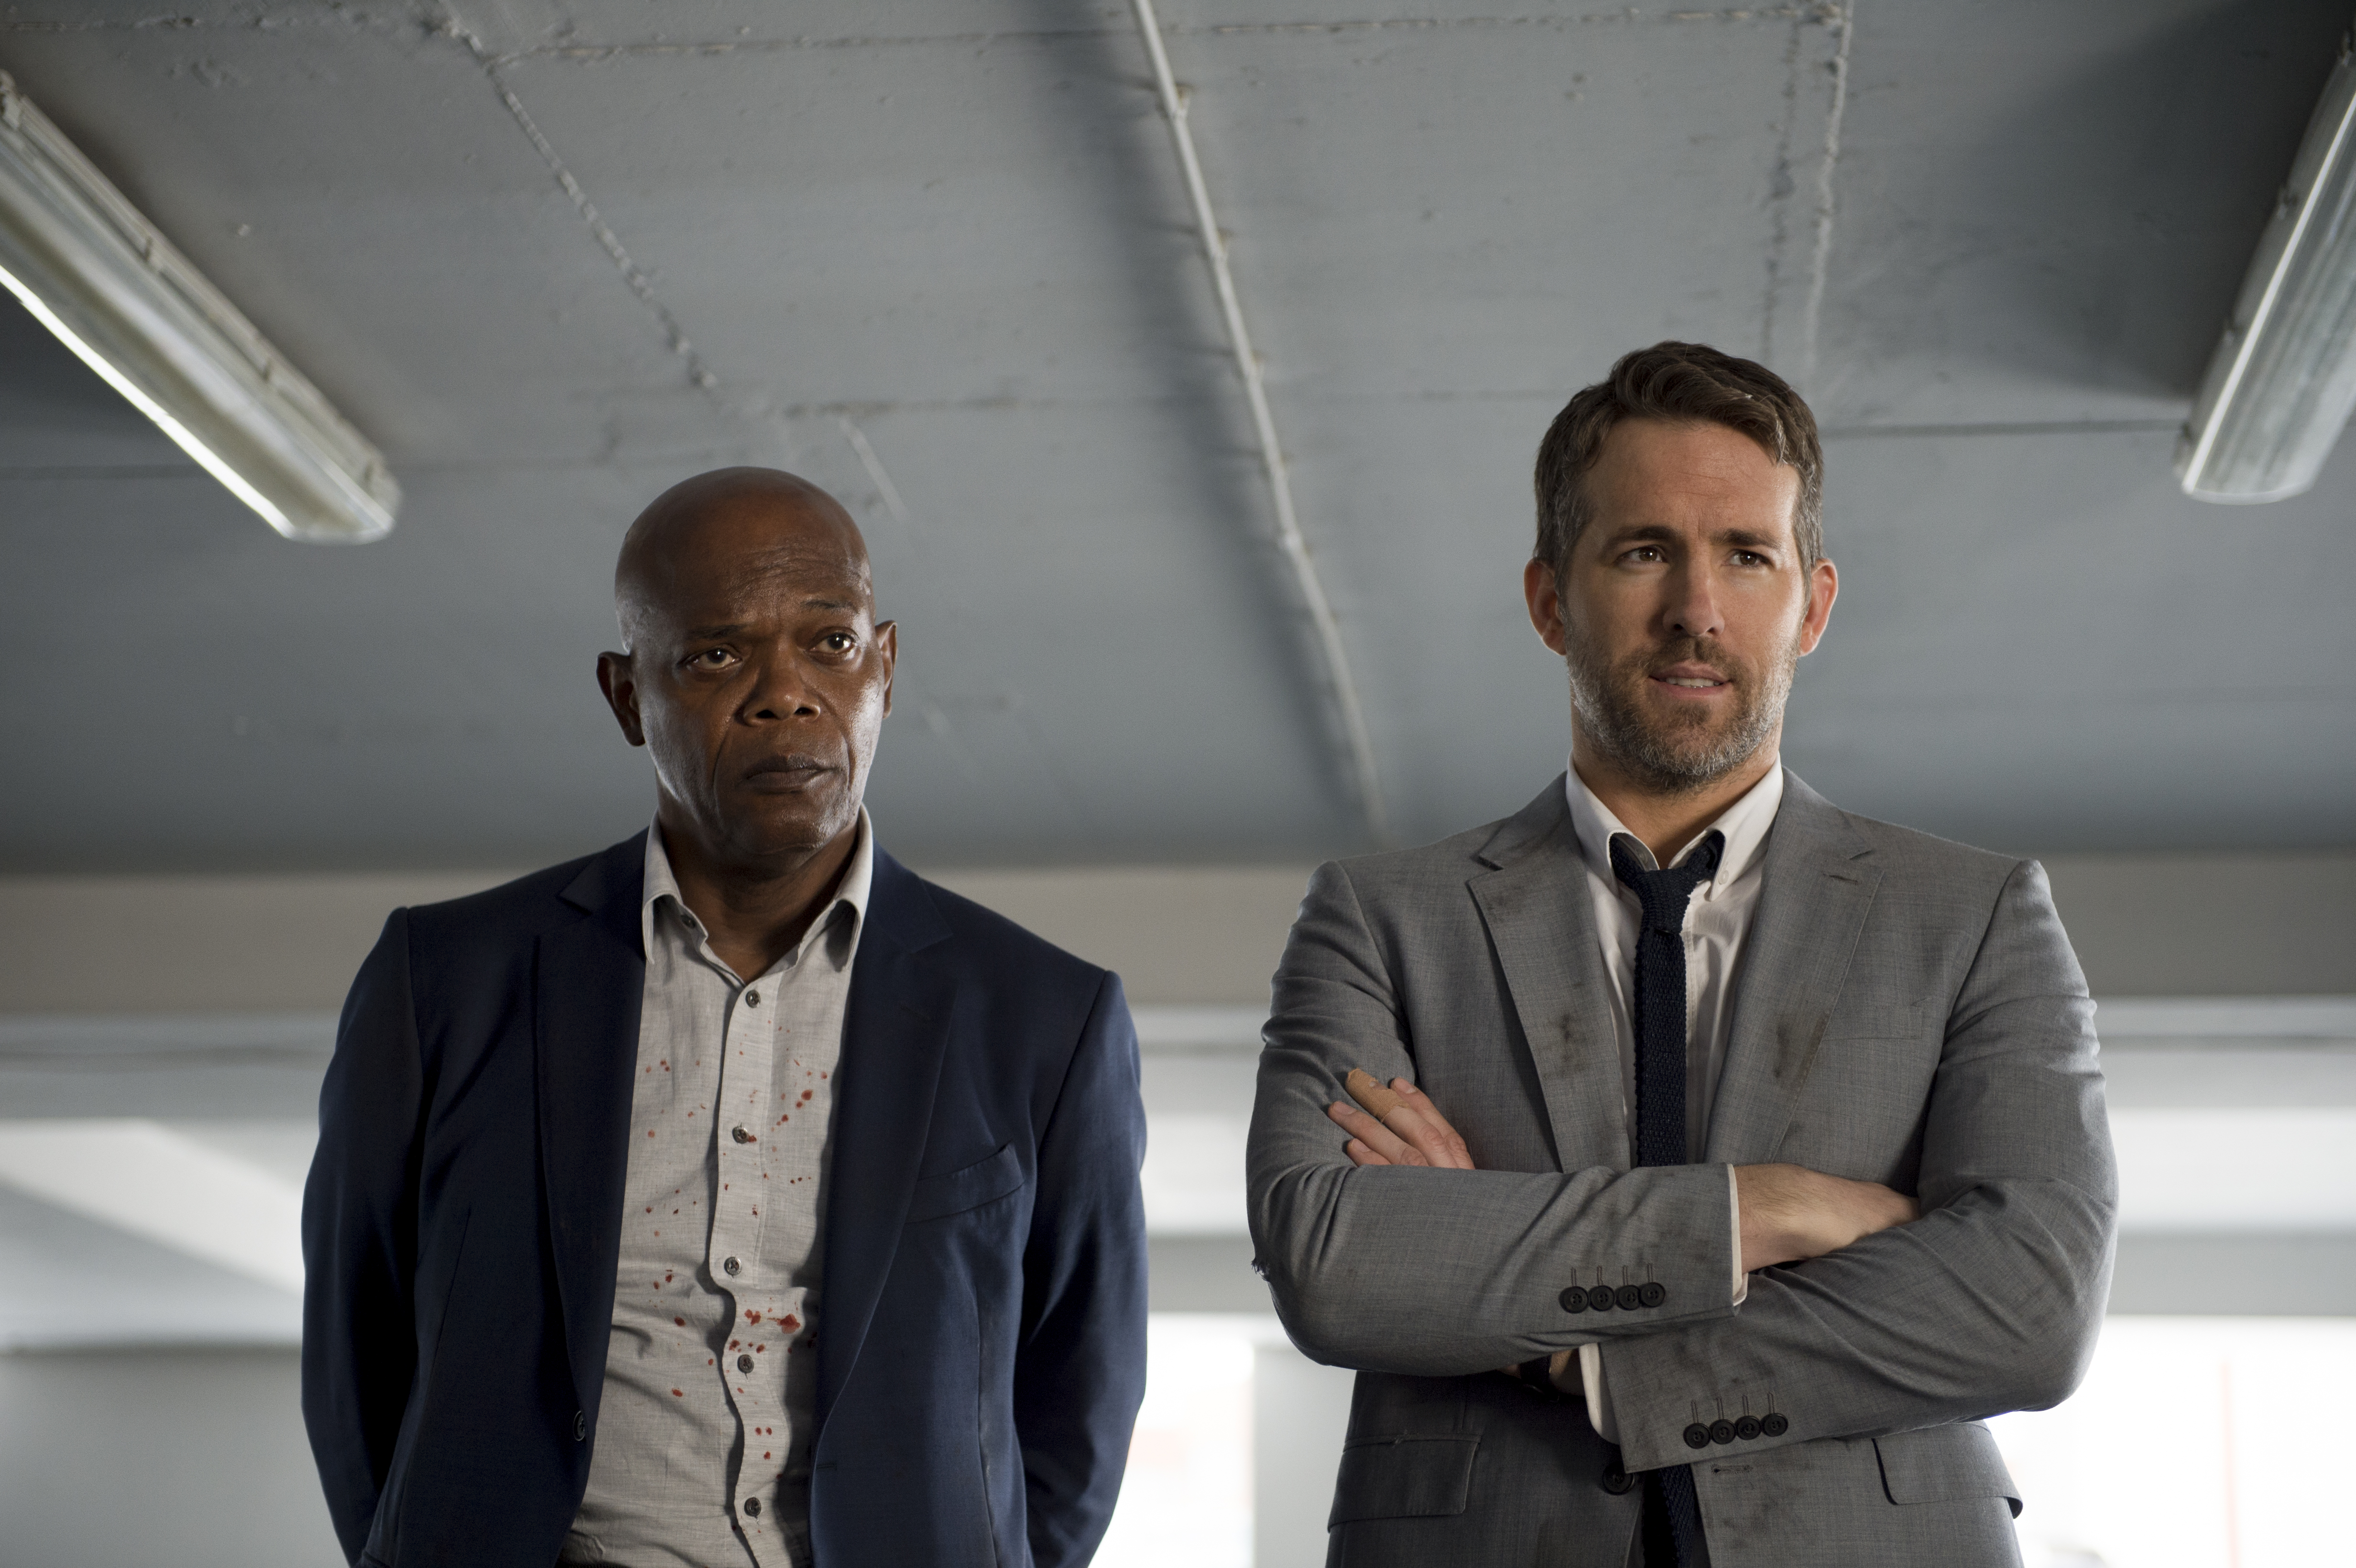 https://www.lifeandstylemag.com/wp-content/uploads/2018/01/ryan-reynolds-the-hitmans-bodyguard.jpg?fit=800%2C532&quality=86&strip=all